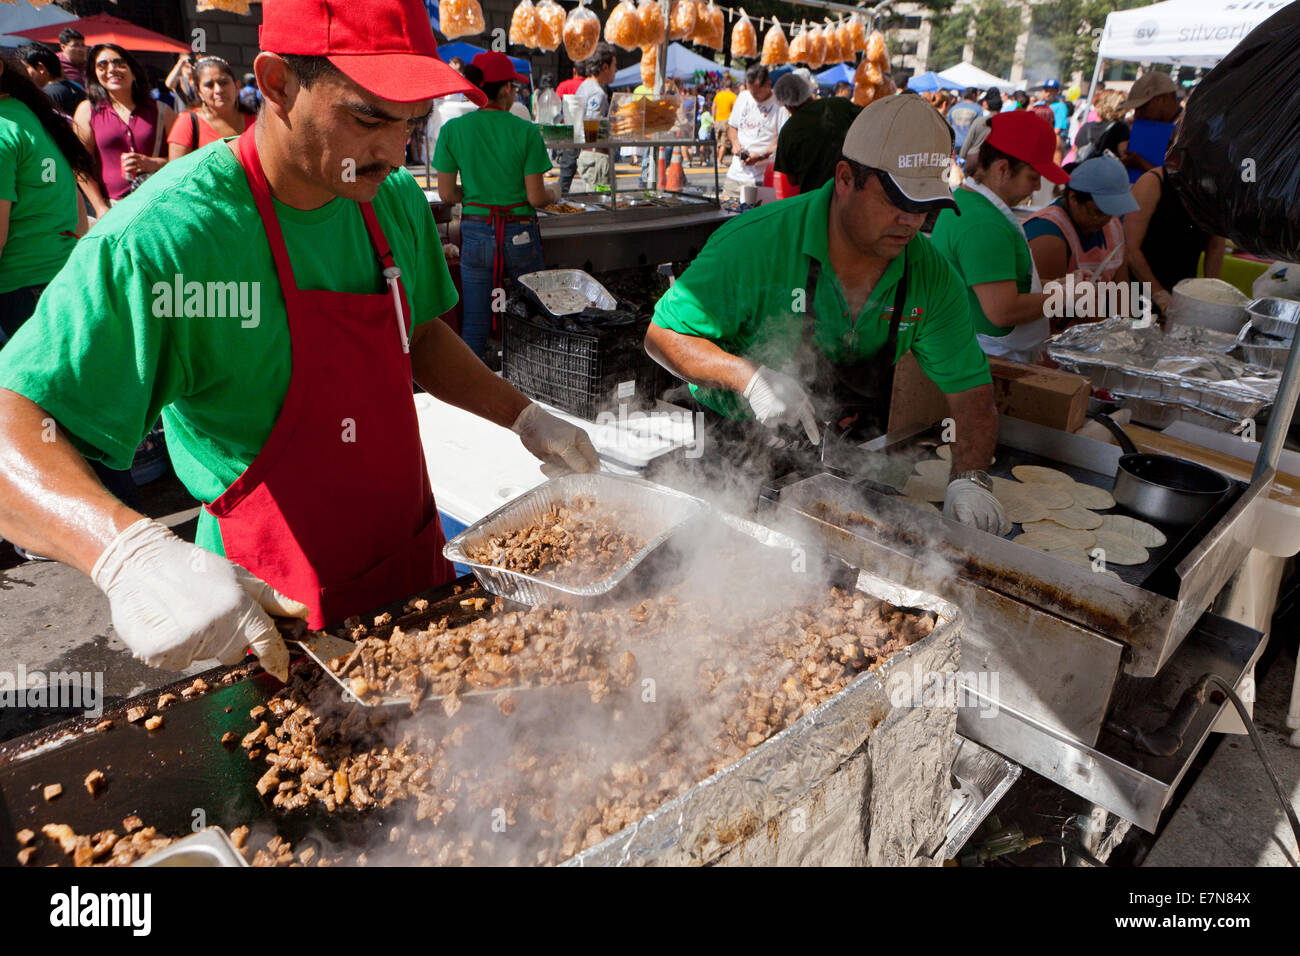 Man grilling chopped pork meat on large griddle at an outdoor food festival - USA Stock Photo